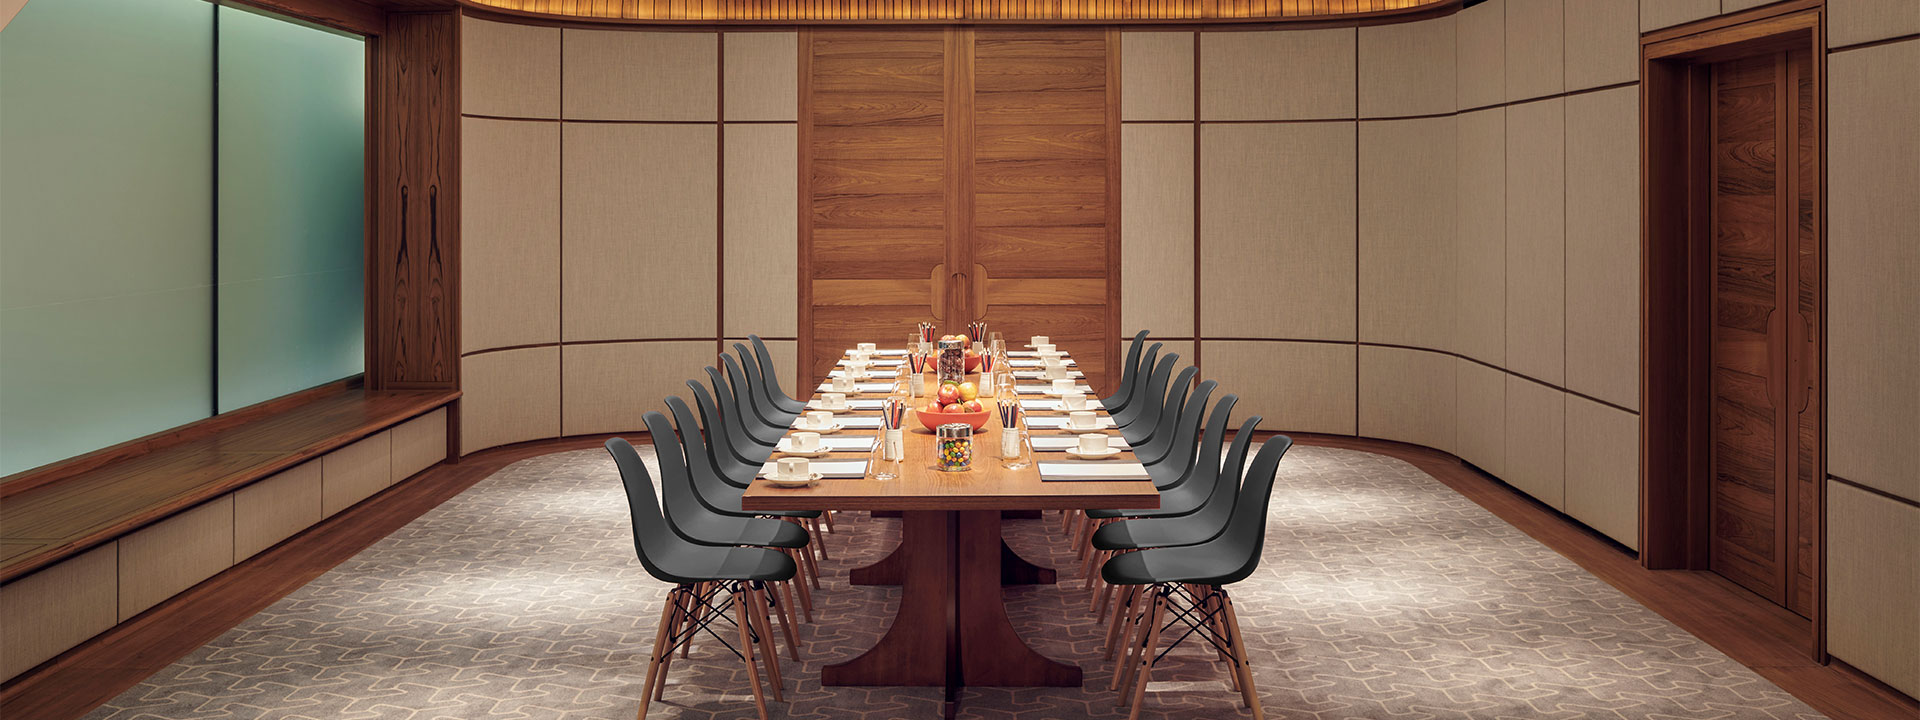 Massive wooden table in the centre of the Wilton Room, with comfortable chairs in a spacious and warm environment.